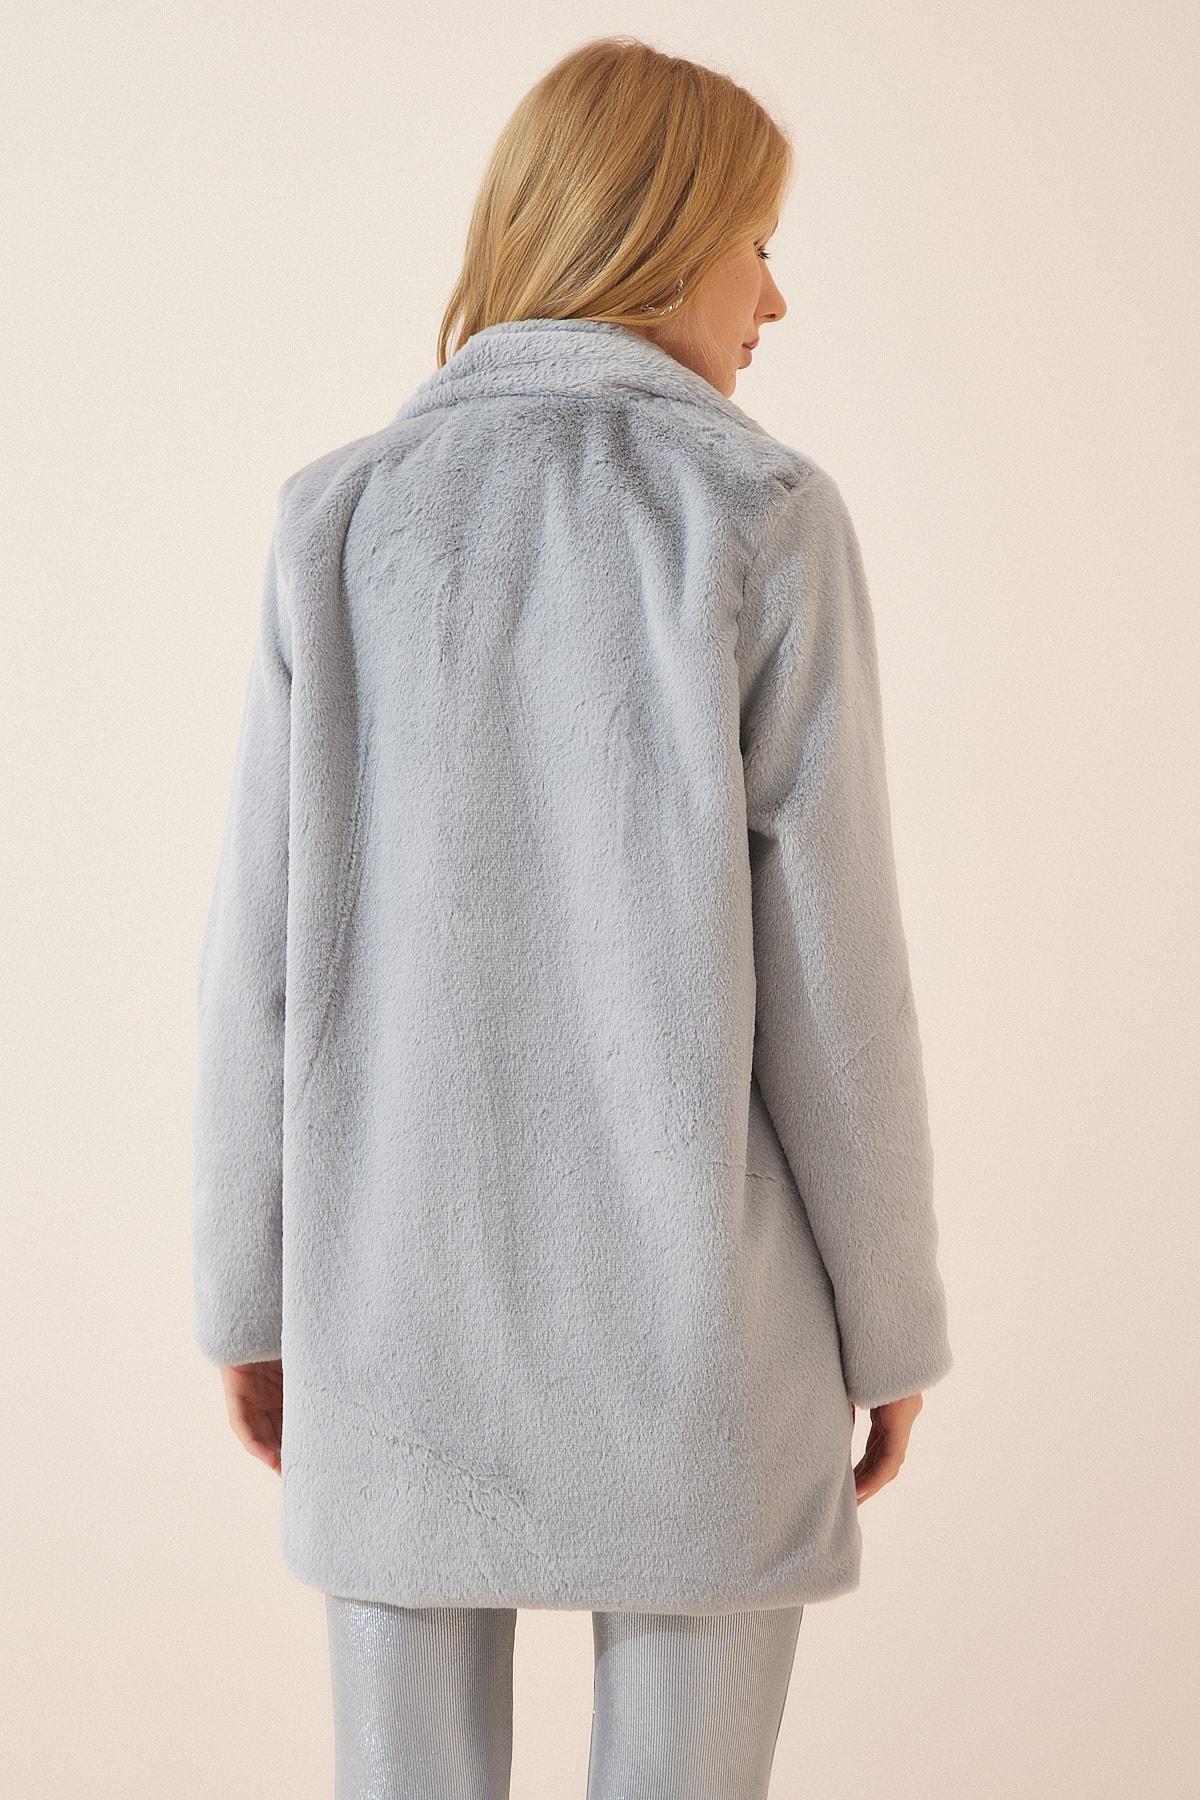 Happiness Istanbul - Gray Faux Fur Coat